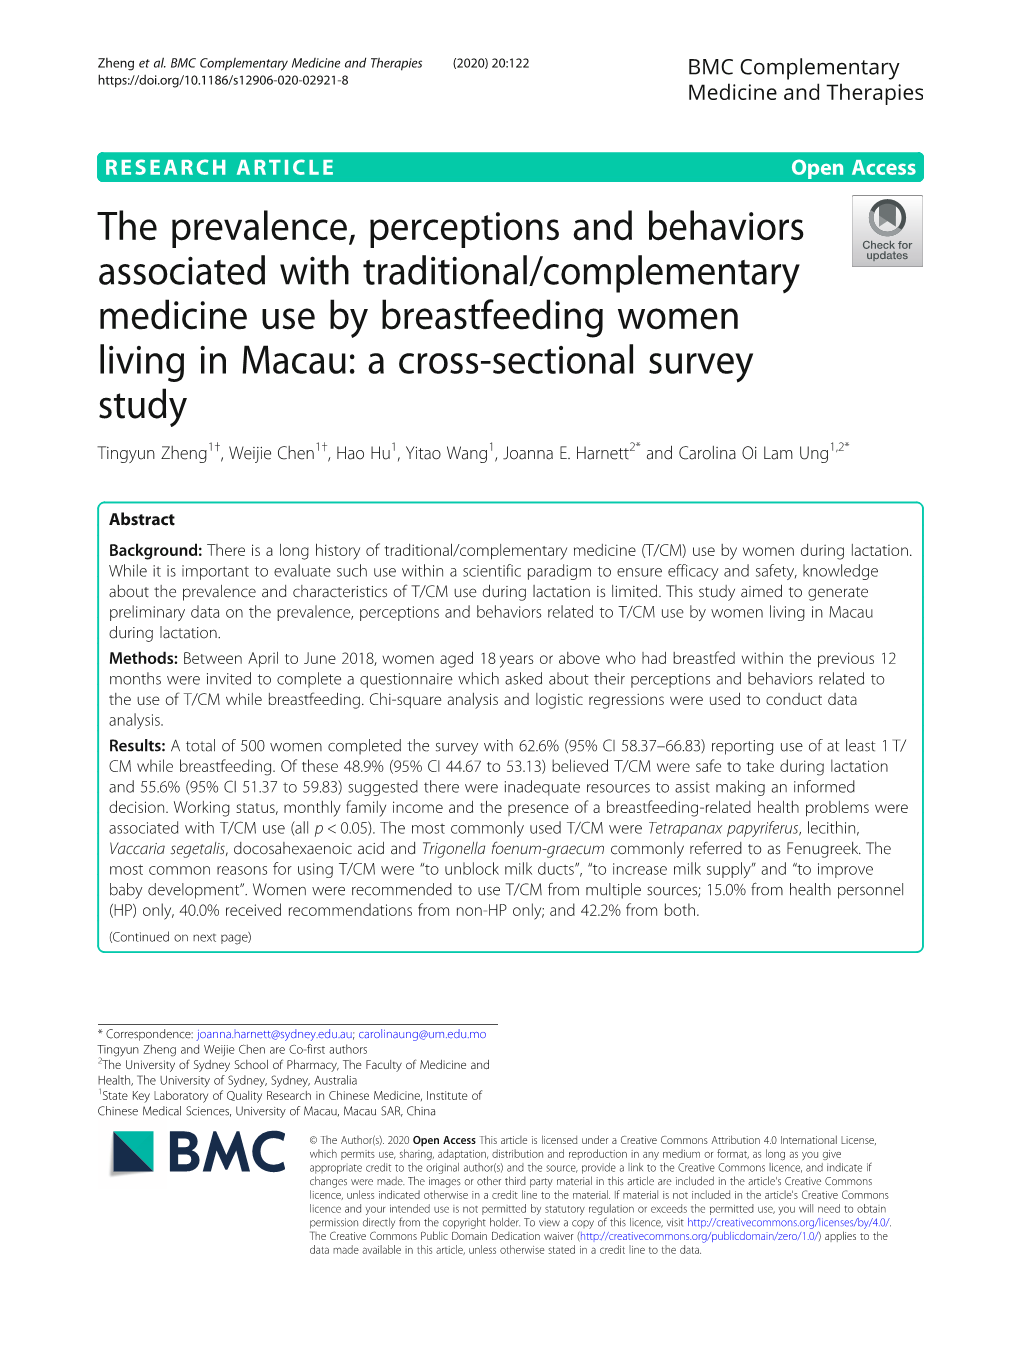 The Prevalence, Perceptions and Behaviors Associated with Traditional/Complementary Medicine Use by Breastfeeding Women Living I